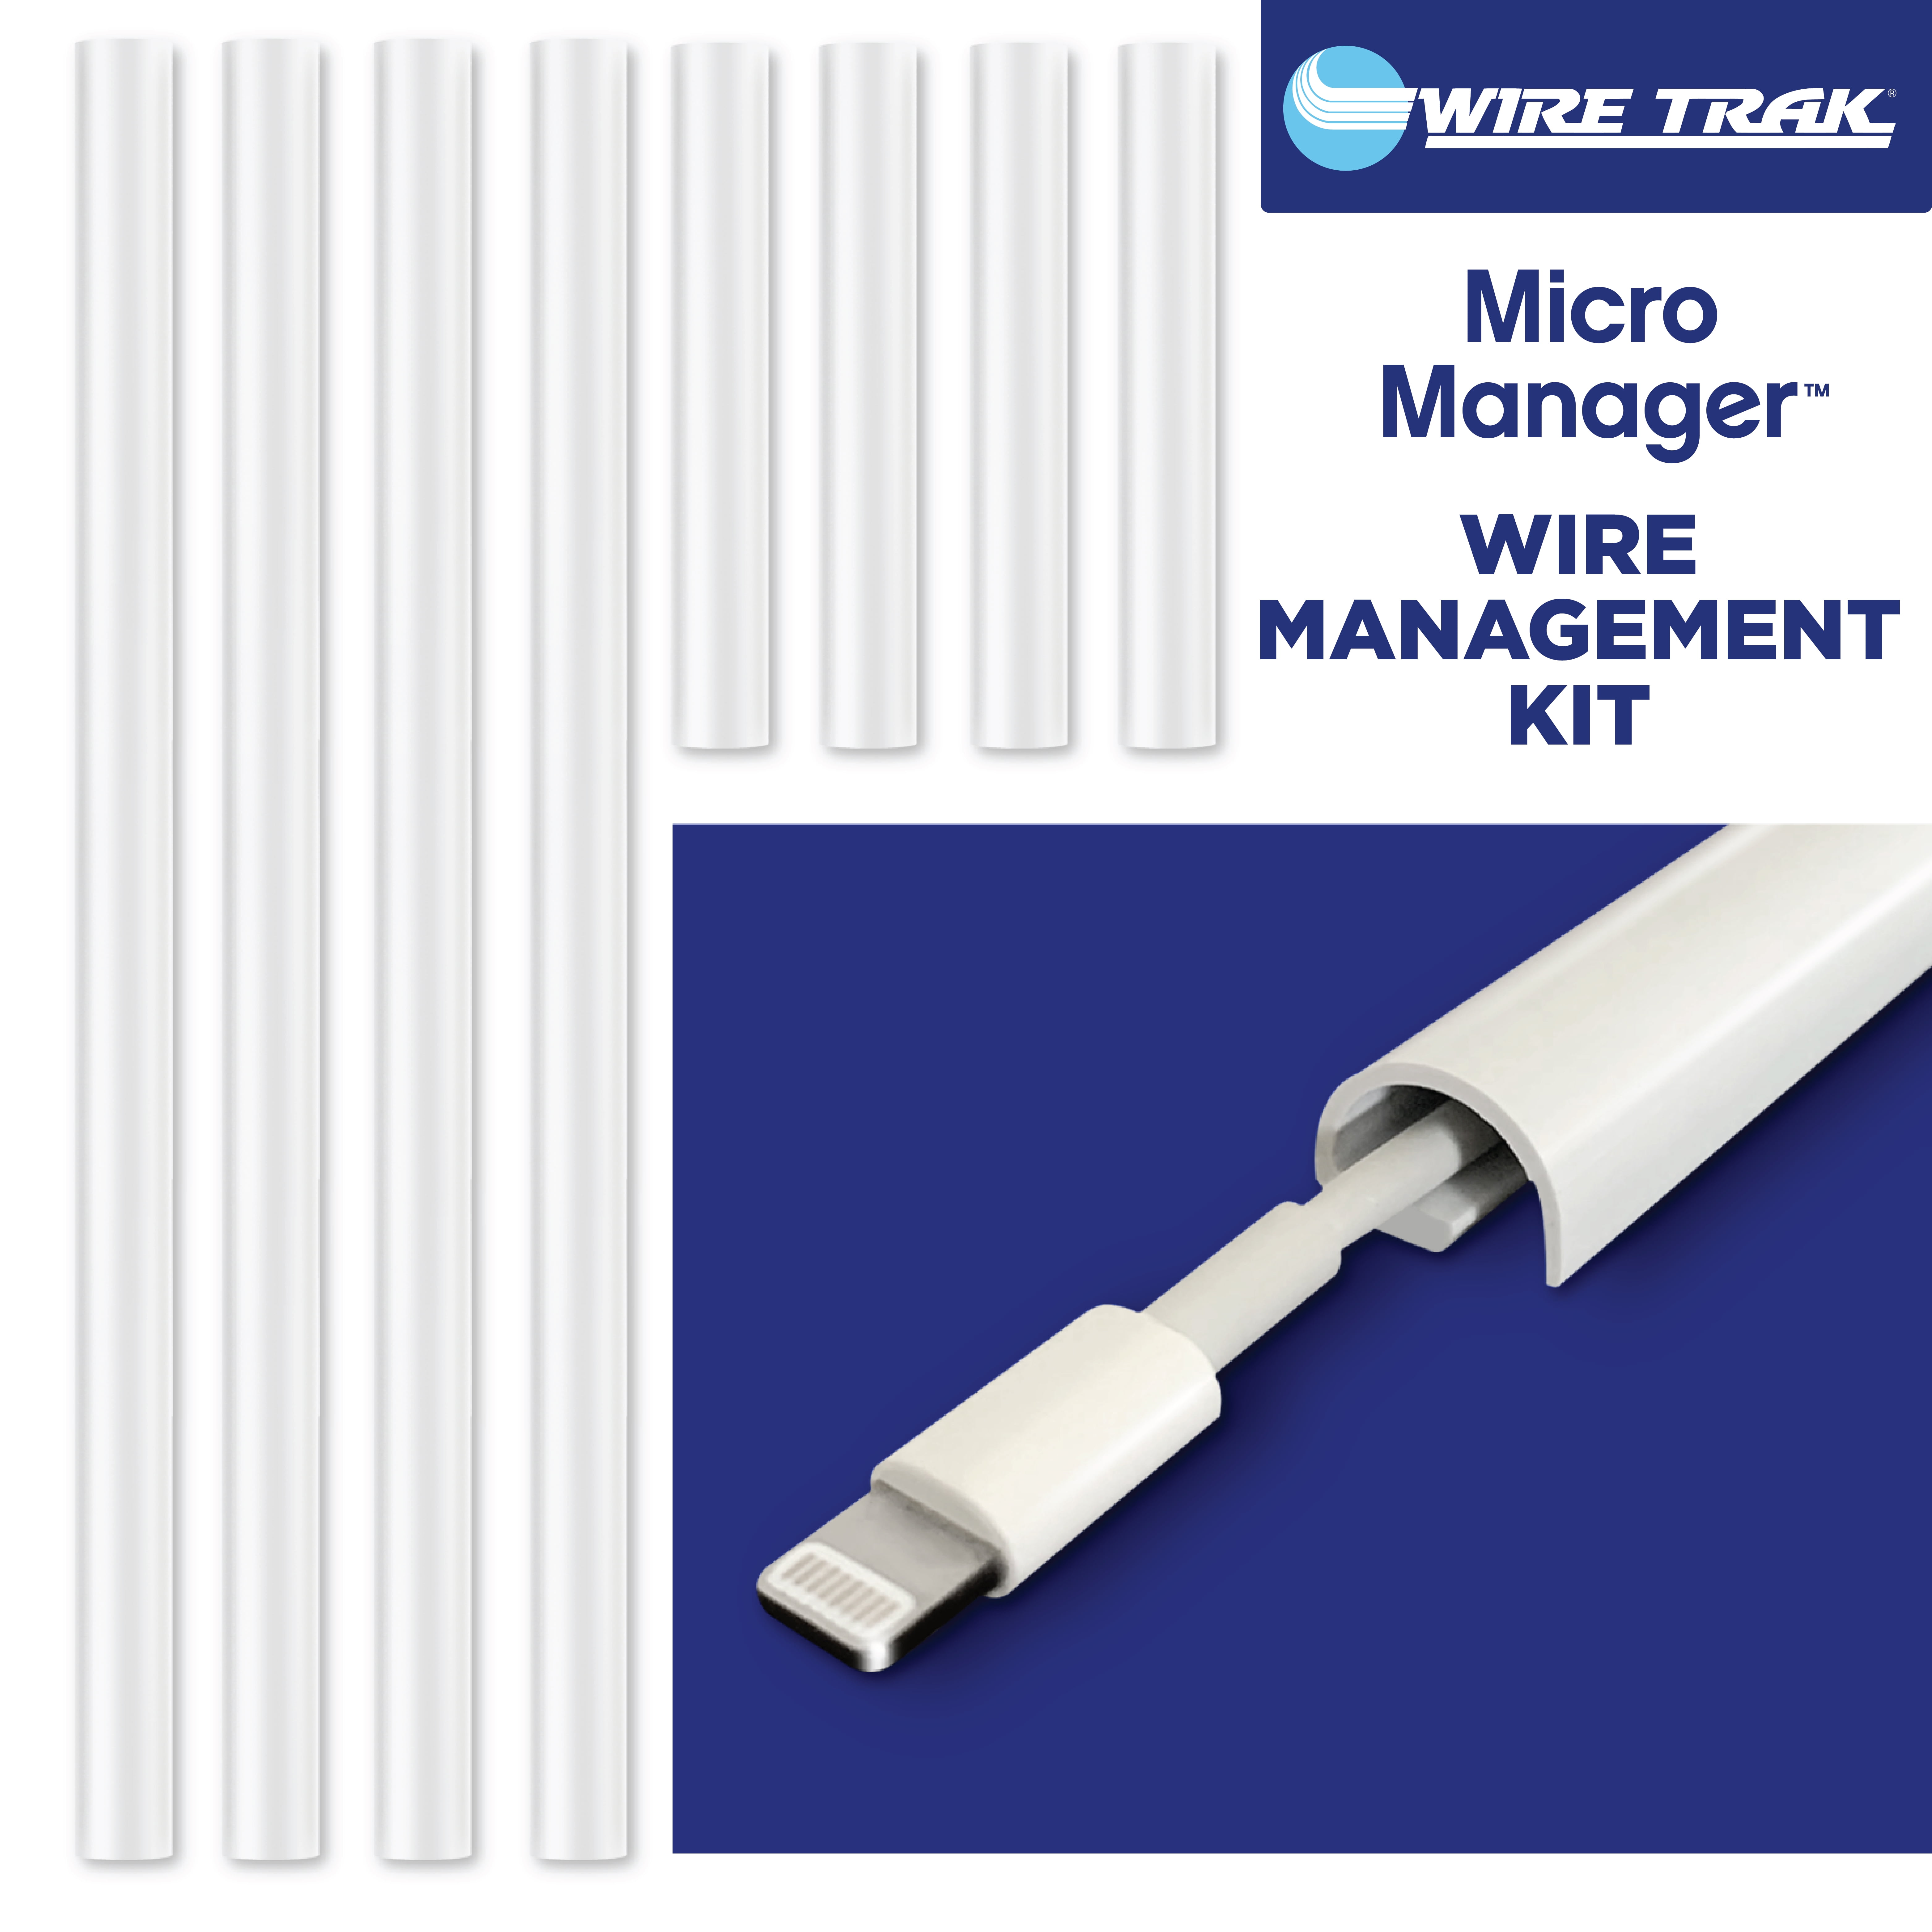 Wire Trak Micro Manager Wire Management Kit, Removable Adhesive